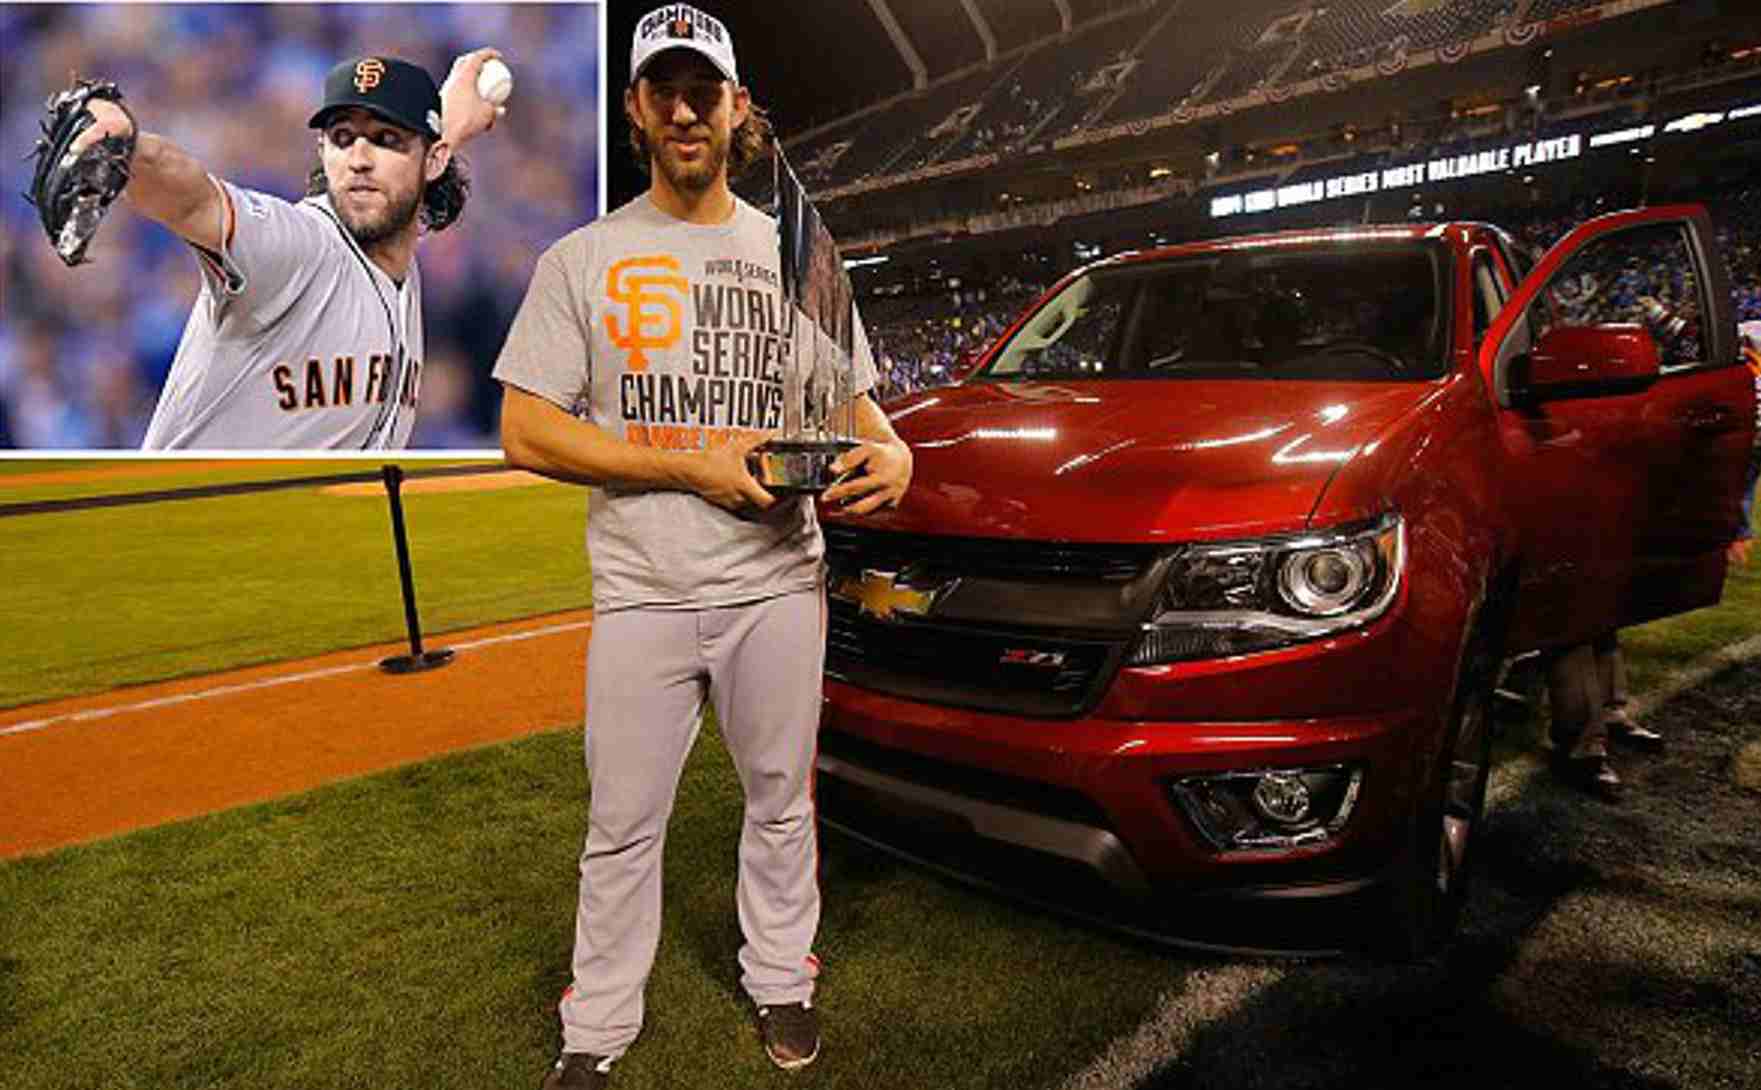 Madison Bumgarner getting award standing in front of his car